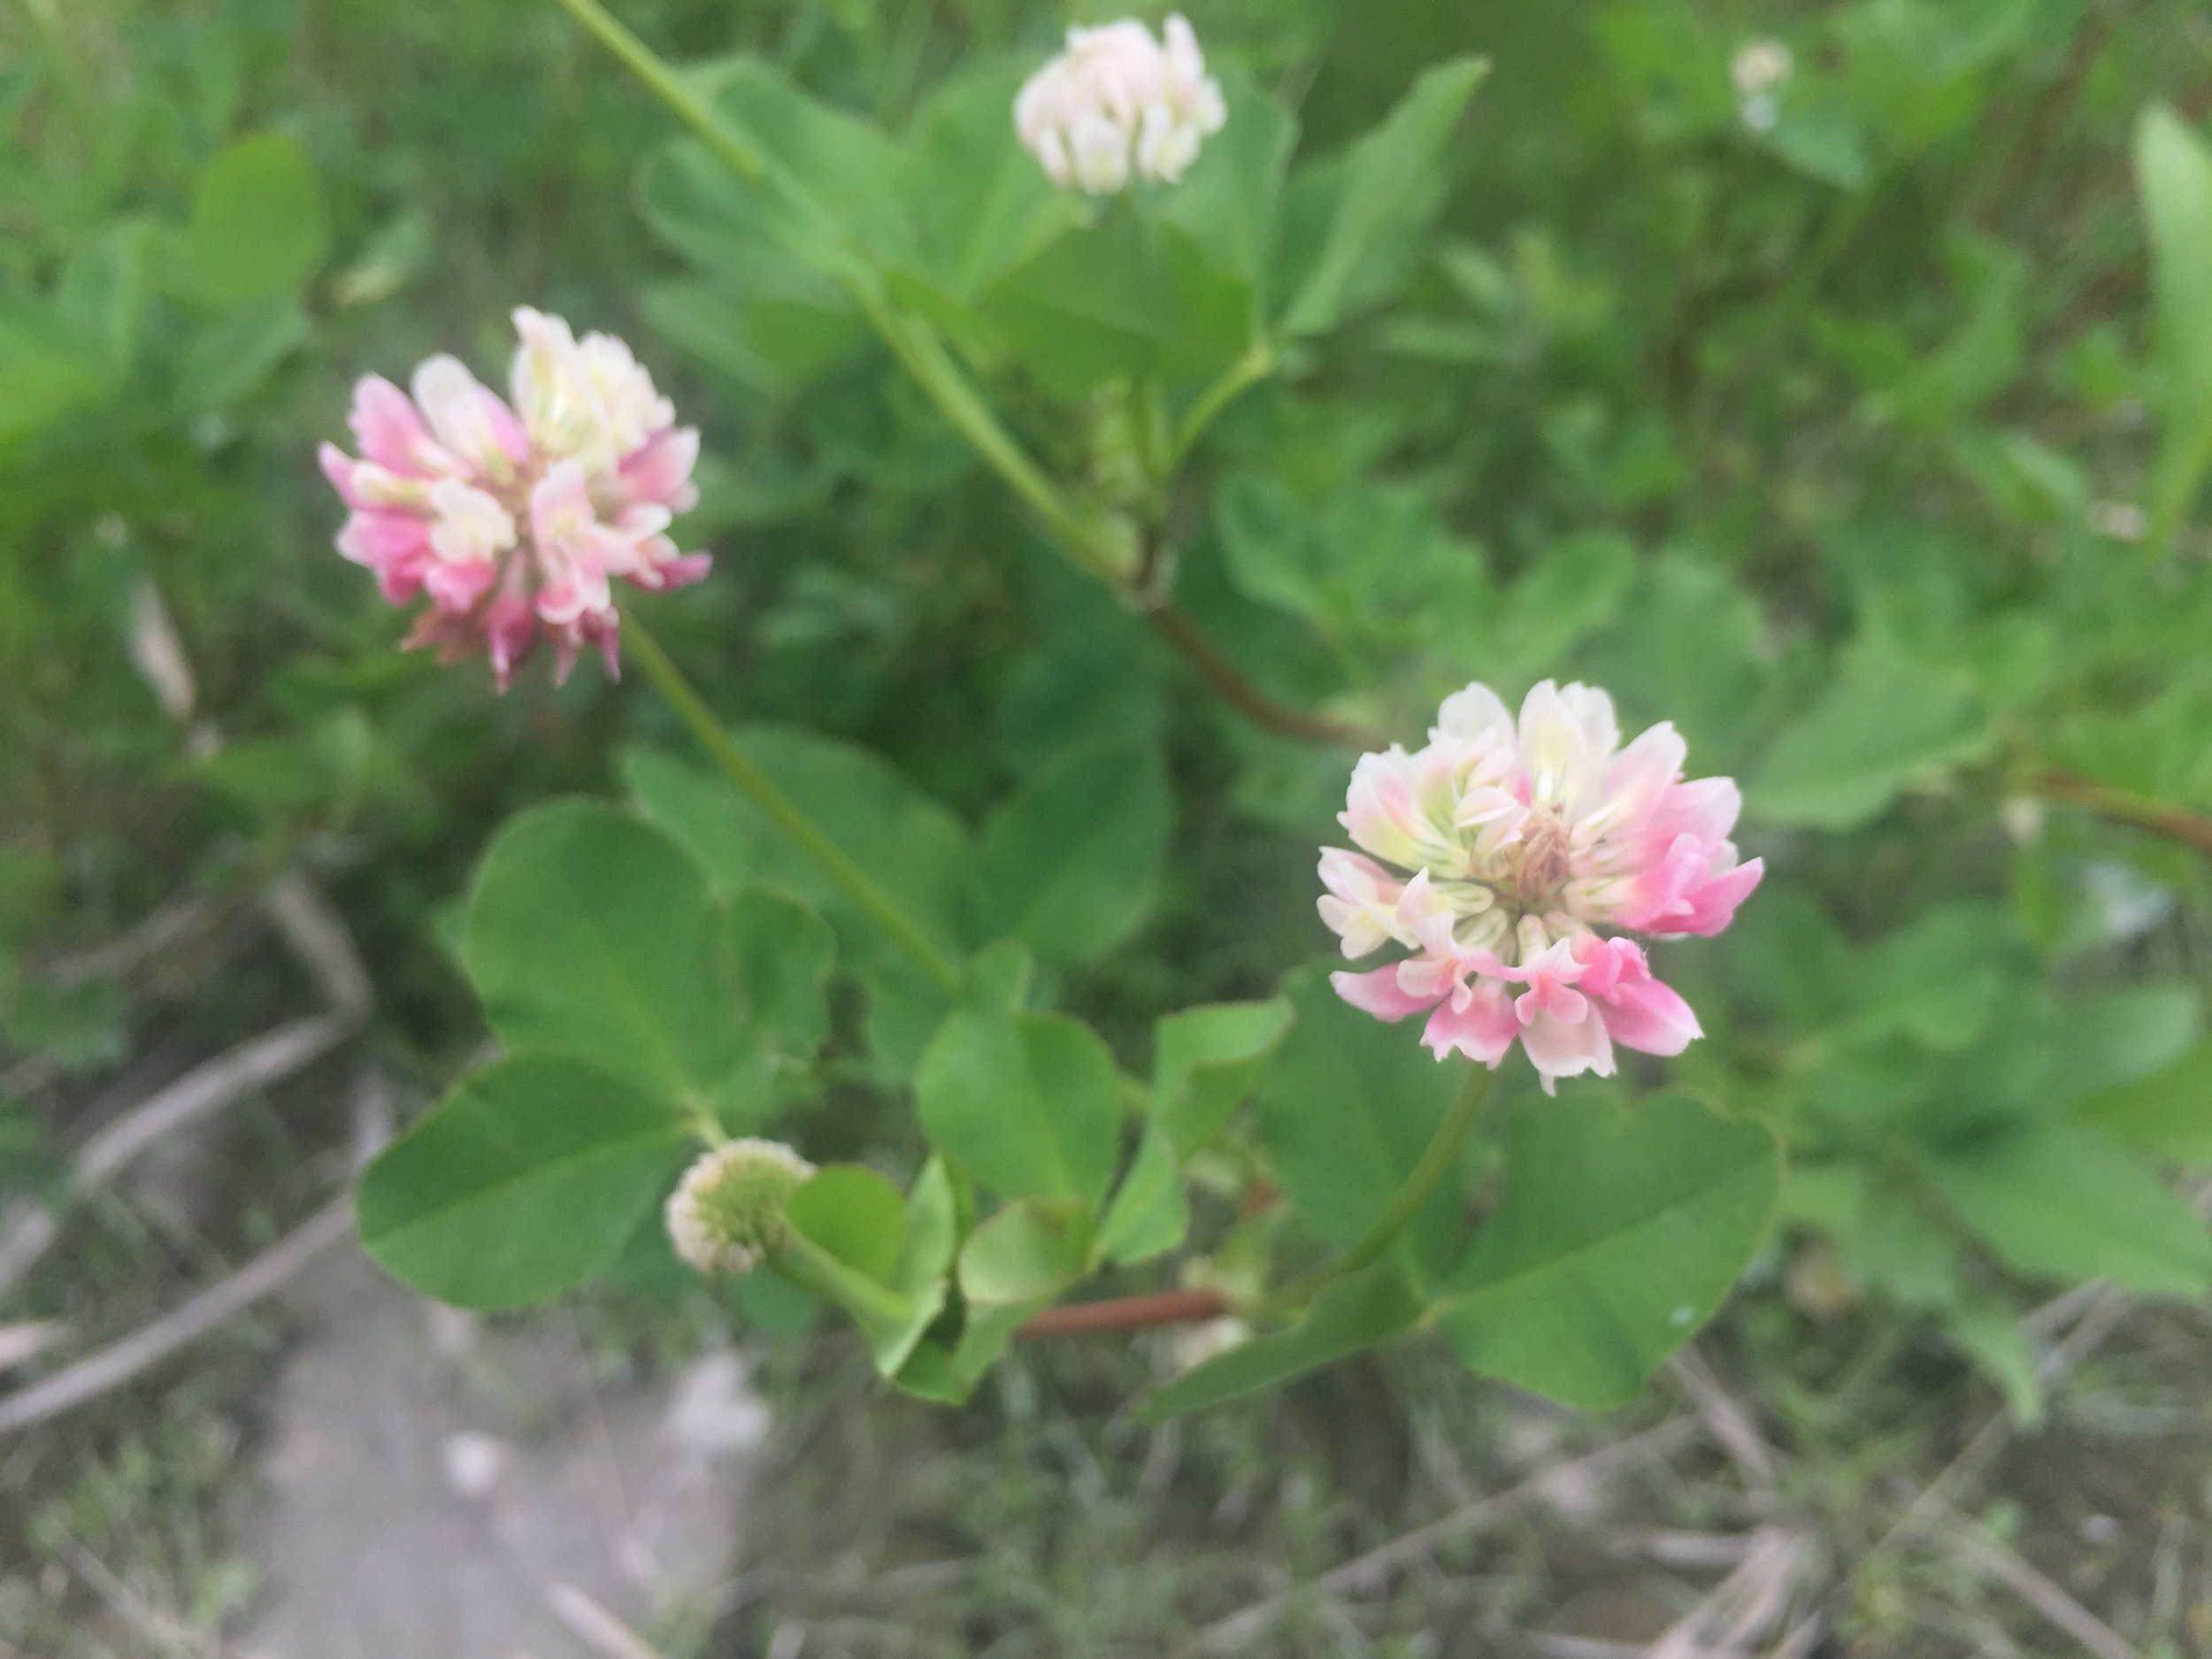  White clover is another excellent ground cover, growing lower and denser than red clover. Permaculturalists buy as much white clover seed as they can afford, and here it is, growing in no-man’s-land. 